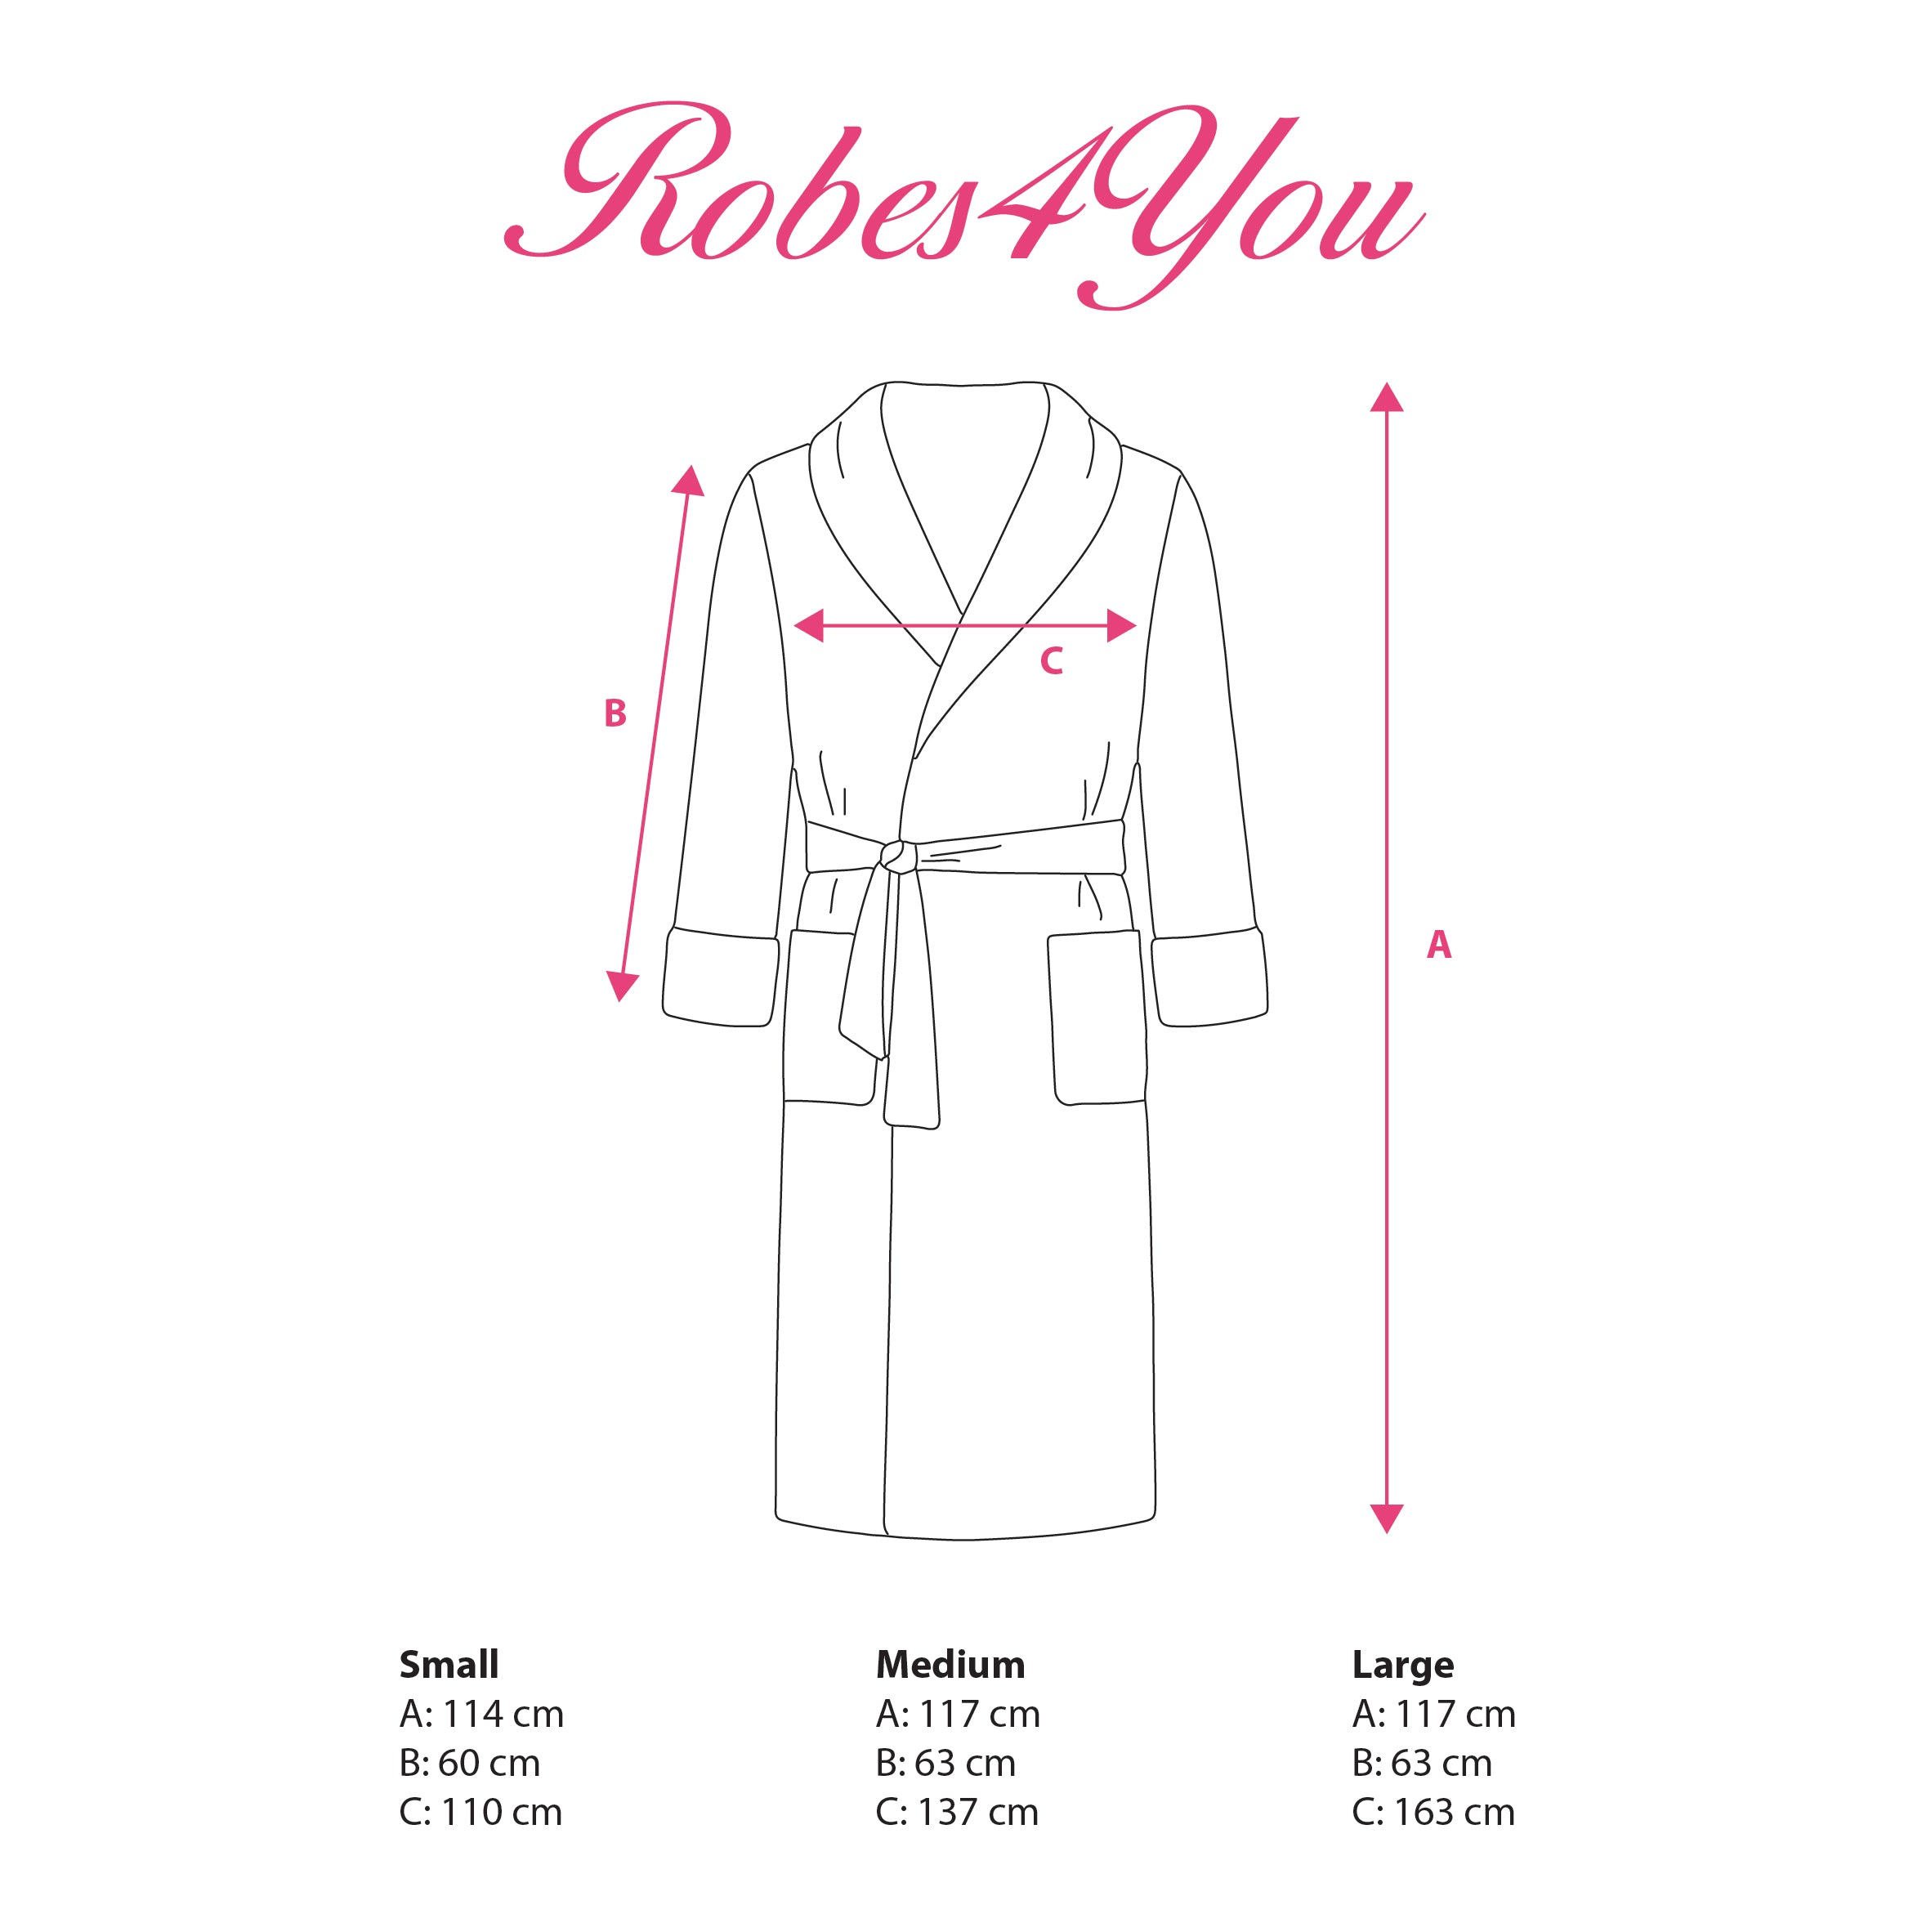 Adult robe sizing-robes4you 